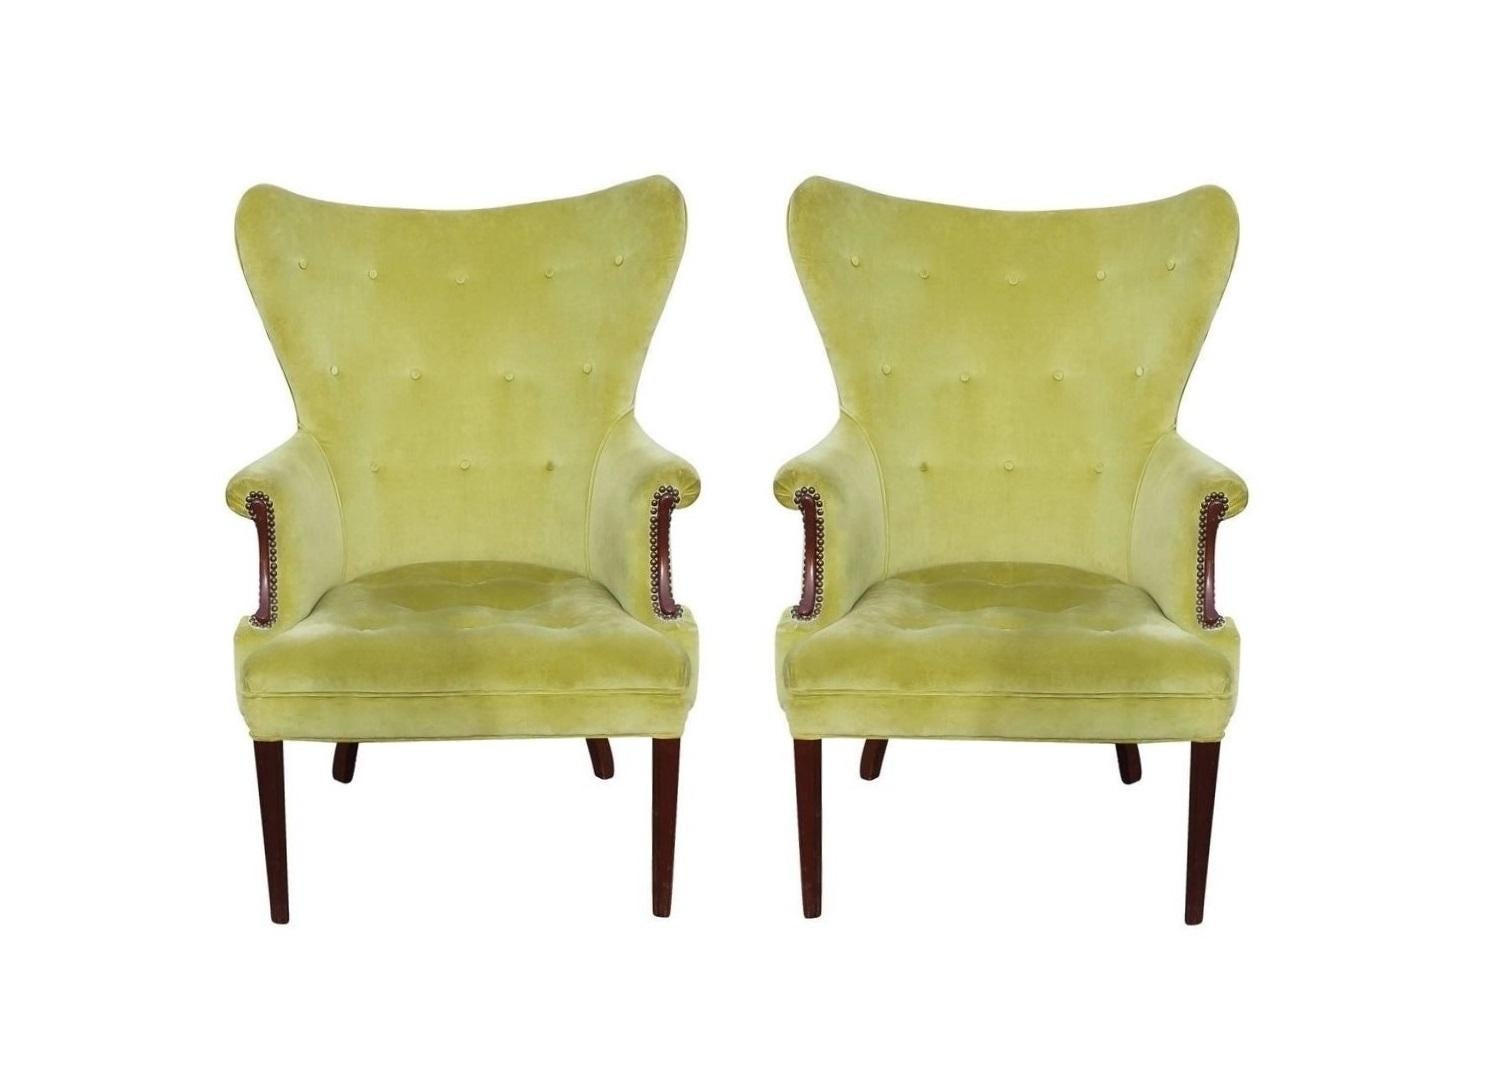 These butterfly wing backs are just gorgeous. Each chair represents a truly novel twist on the centuries-old design of the wing chair, reminiscent of Edward Wormley's designs for Dunbar, perfect for today. Impressively built, the exaggerated